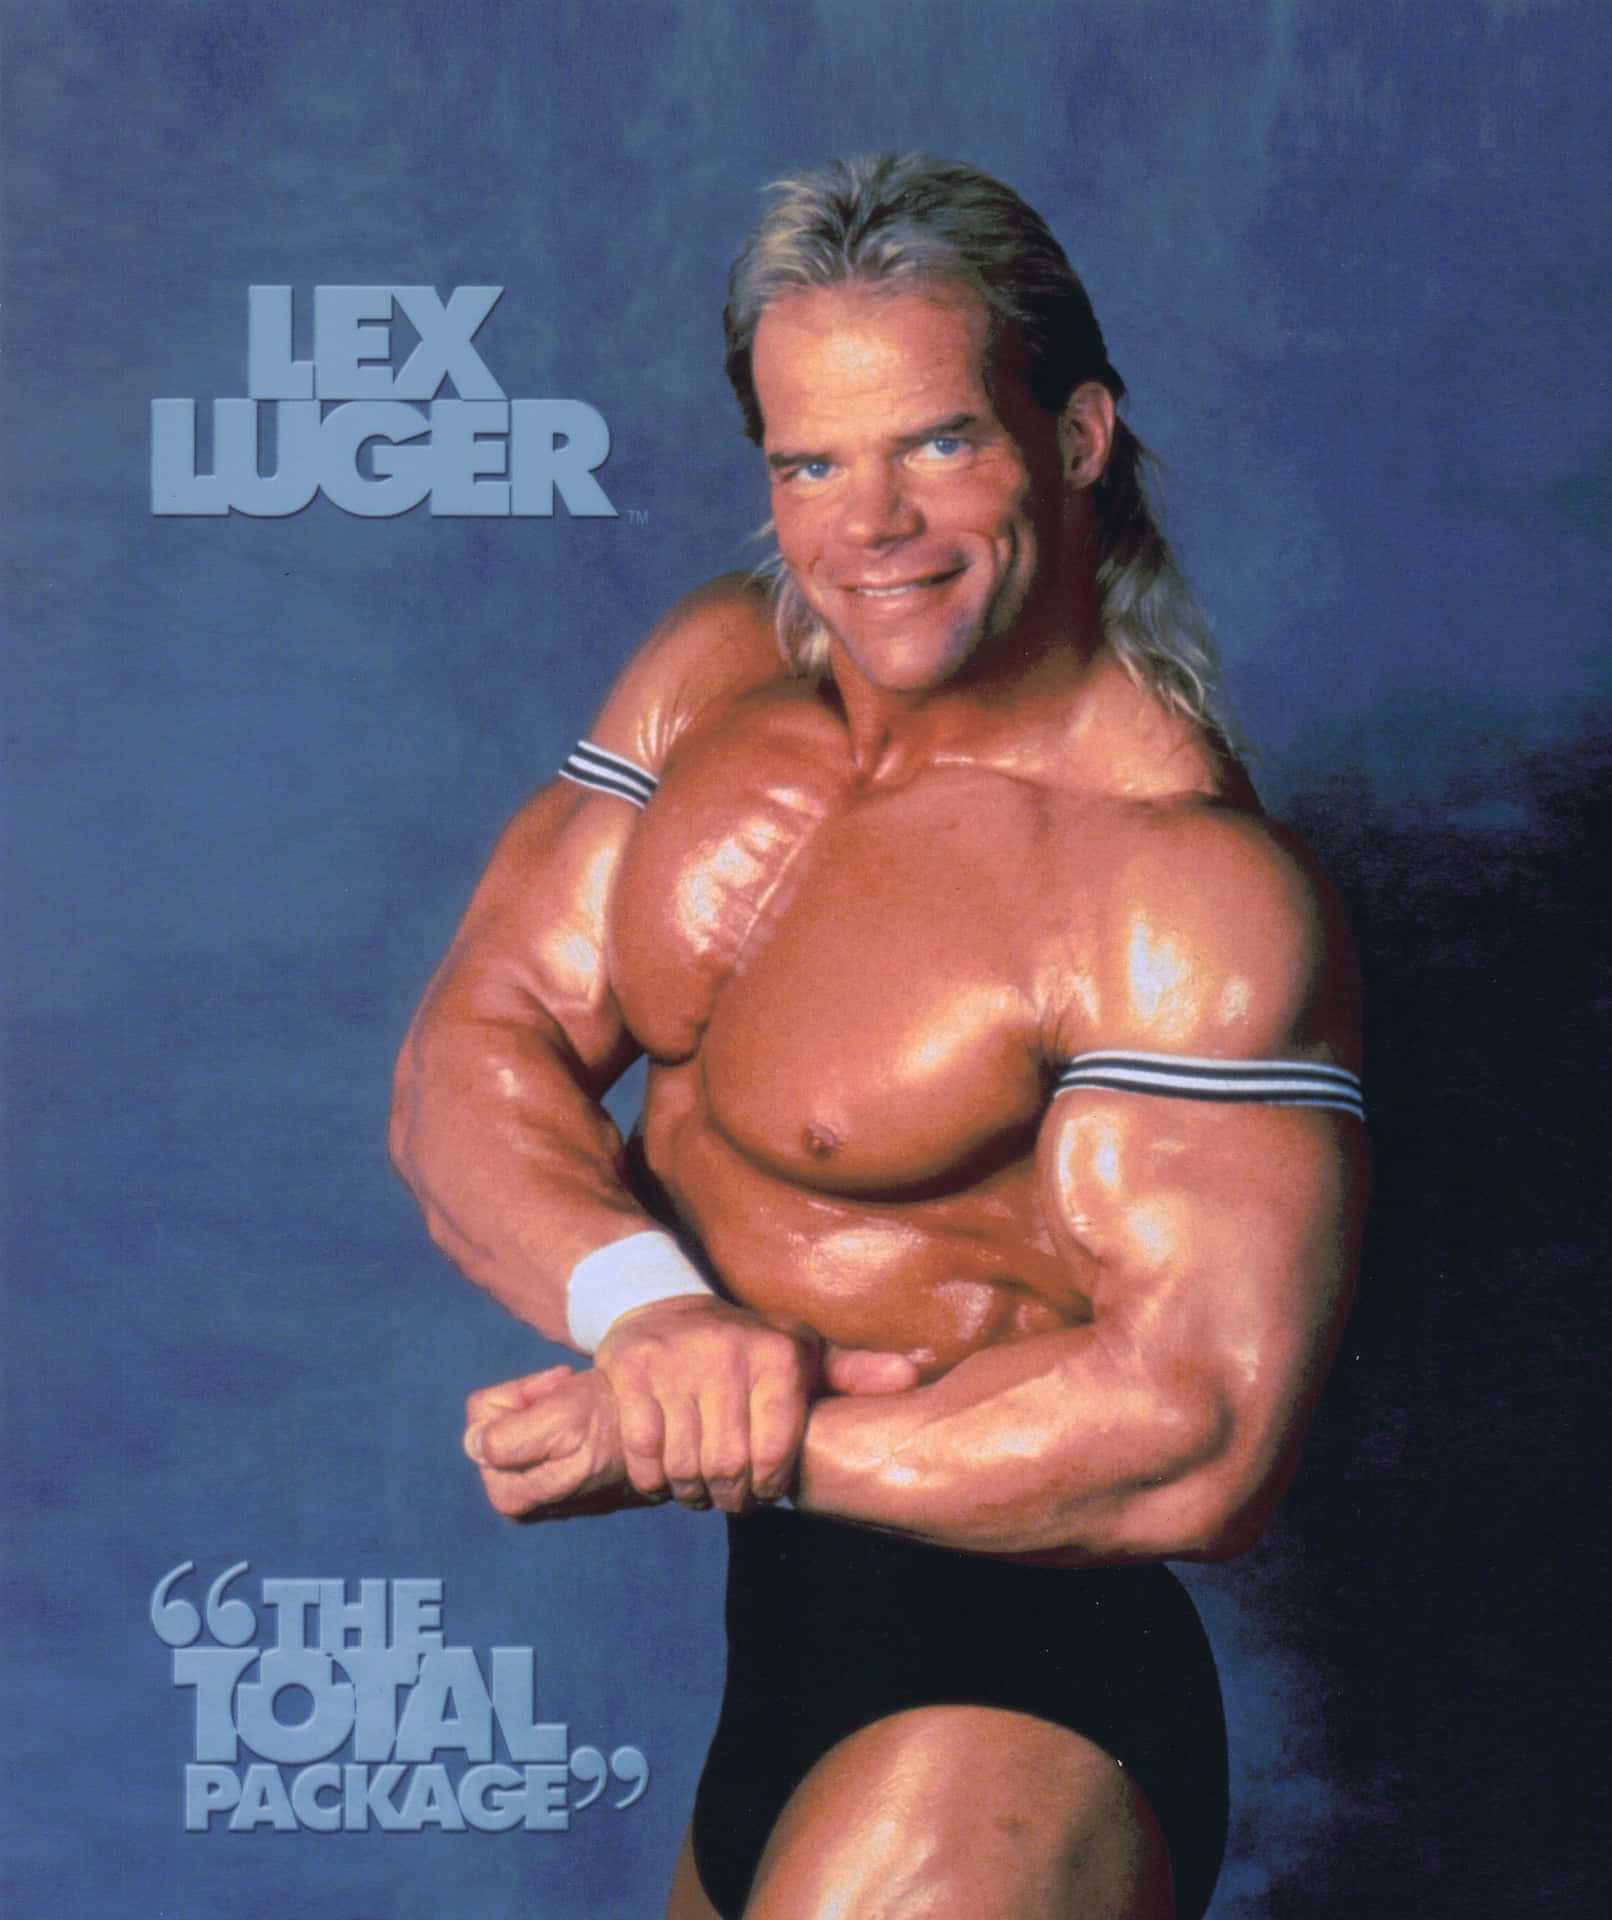 American Wrestler Lex Luger For The Total Package Poster Wallpaper